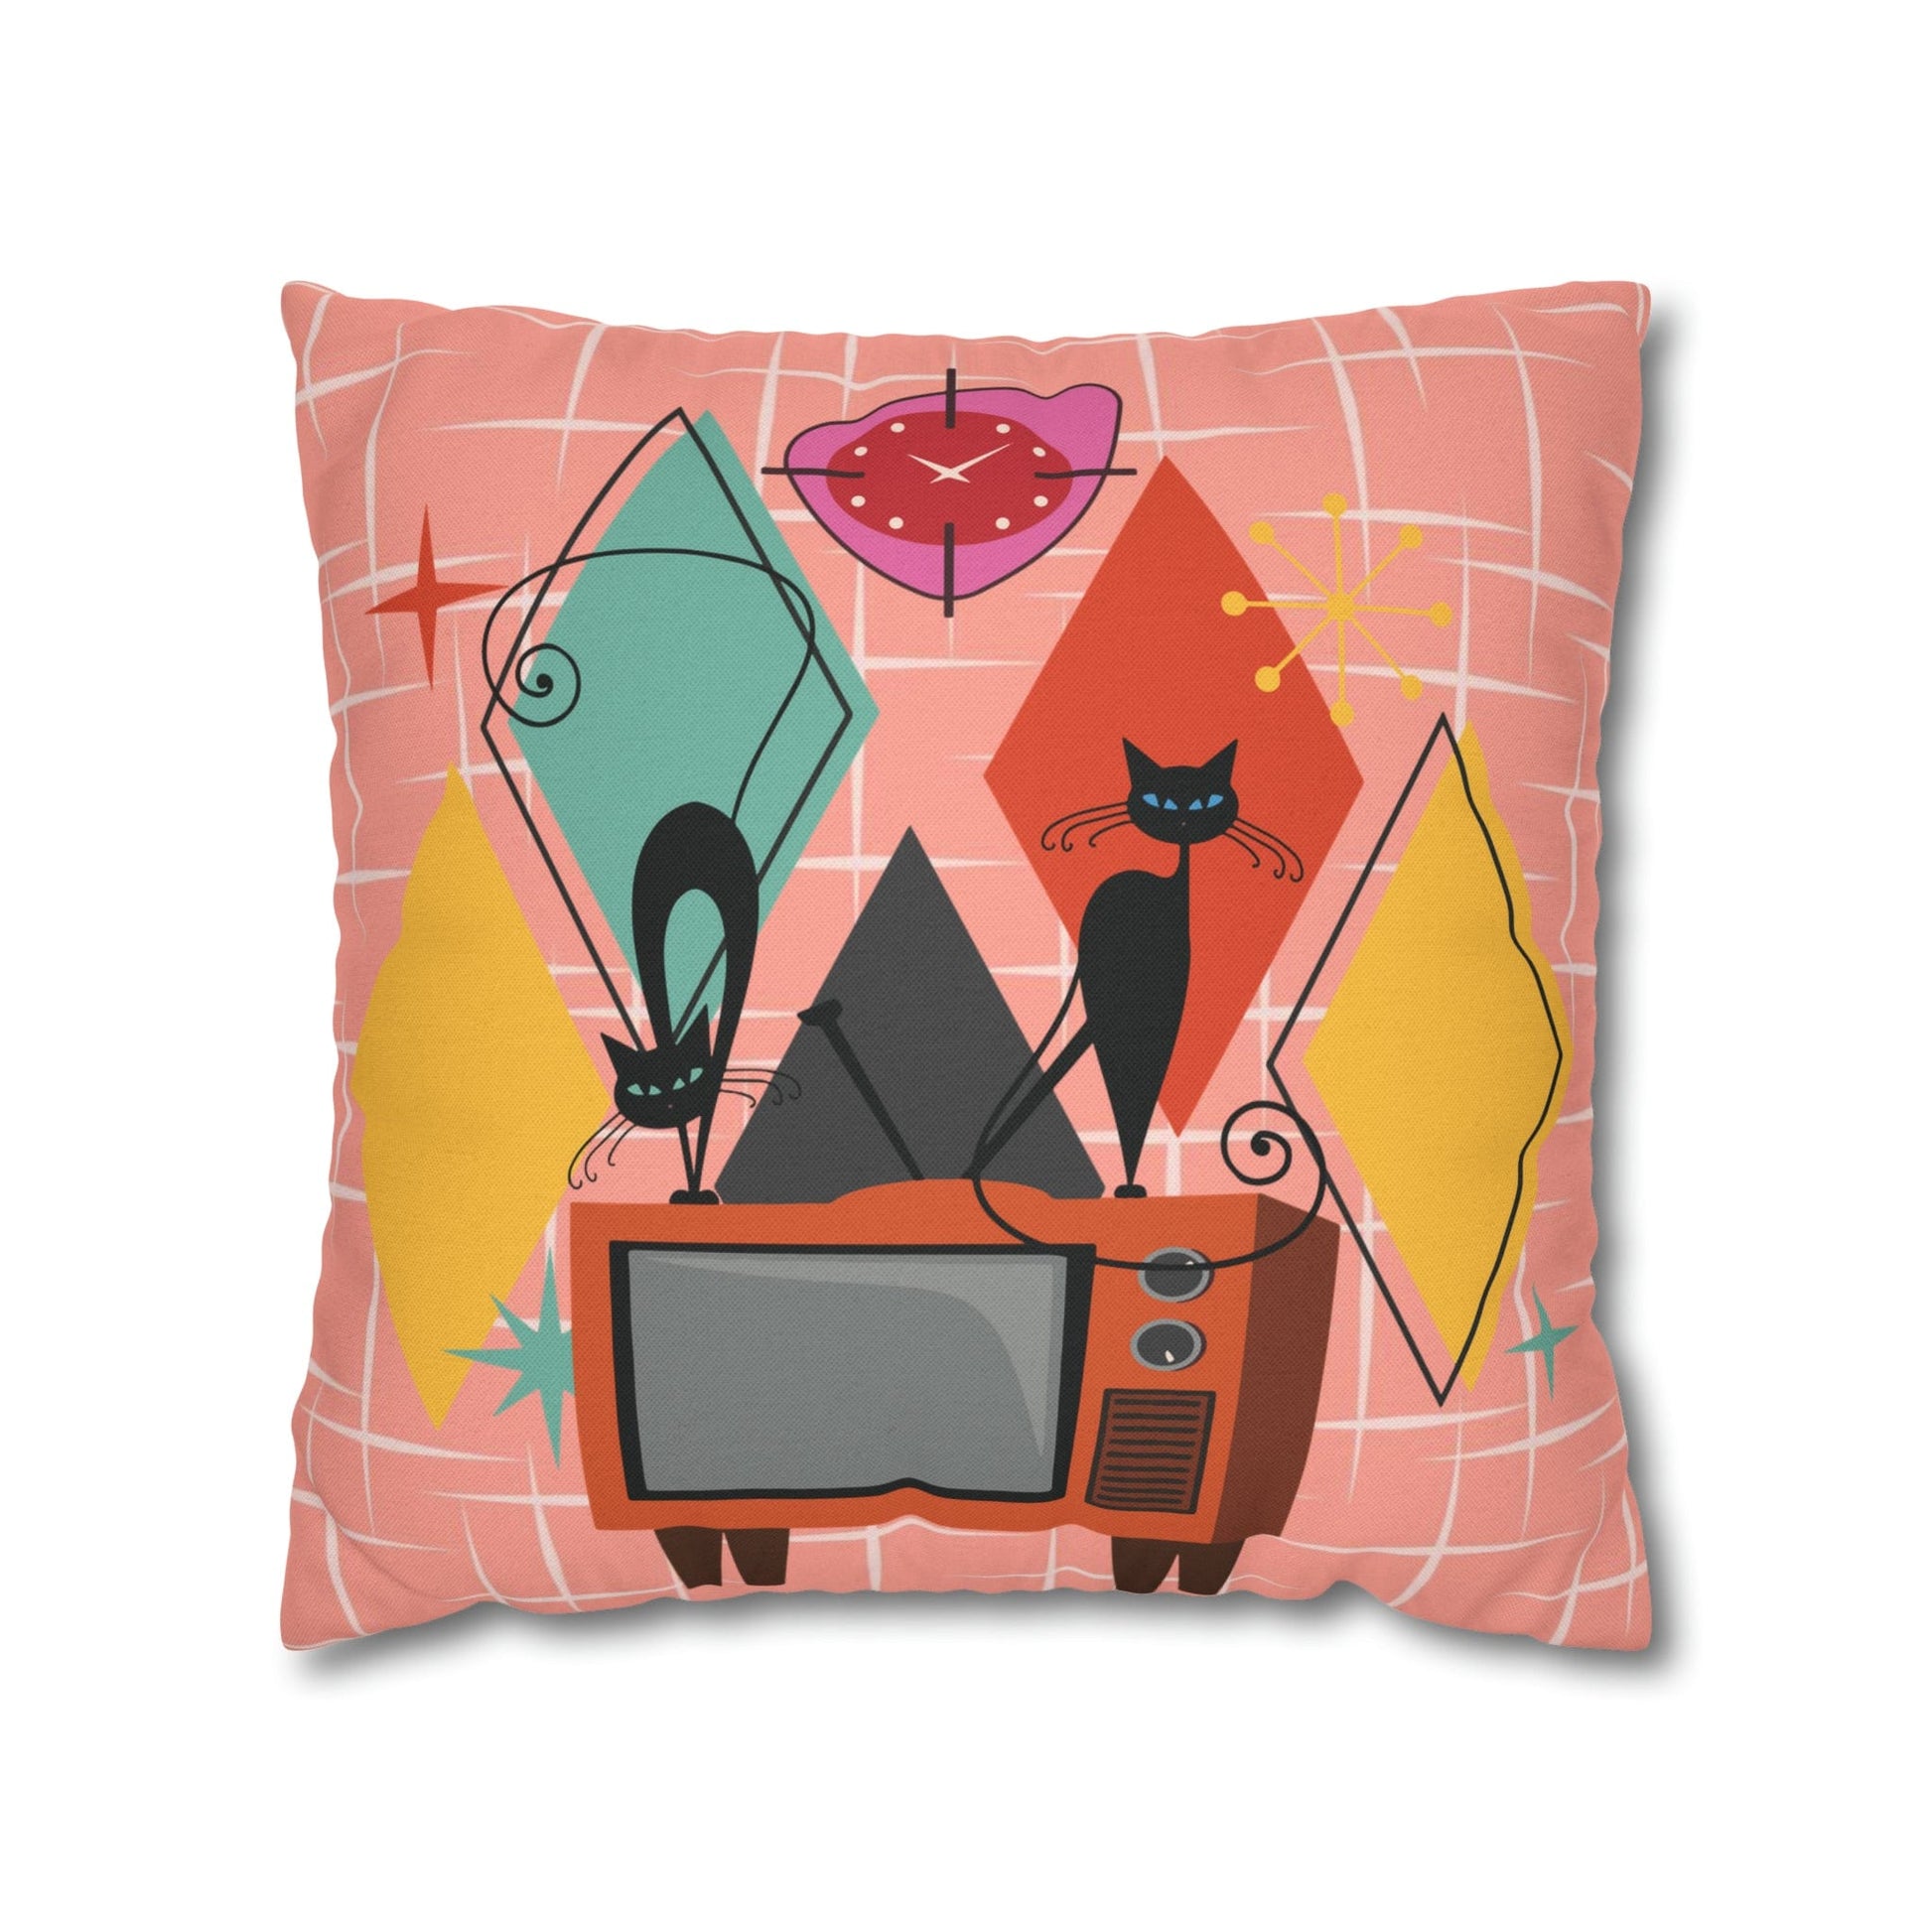 Kate McEnroe New York Atomic Cat Retro TV Pillow Cover, Mid Century Modern Orange, Teal, Yellow, Pink Cushion Covers, MCM Pillow Case Throw Pillow Covers 18" × 18" 28026697588794533196